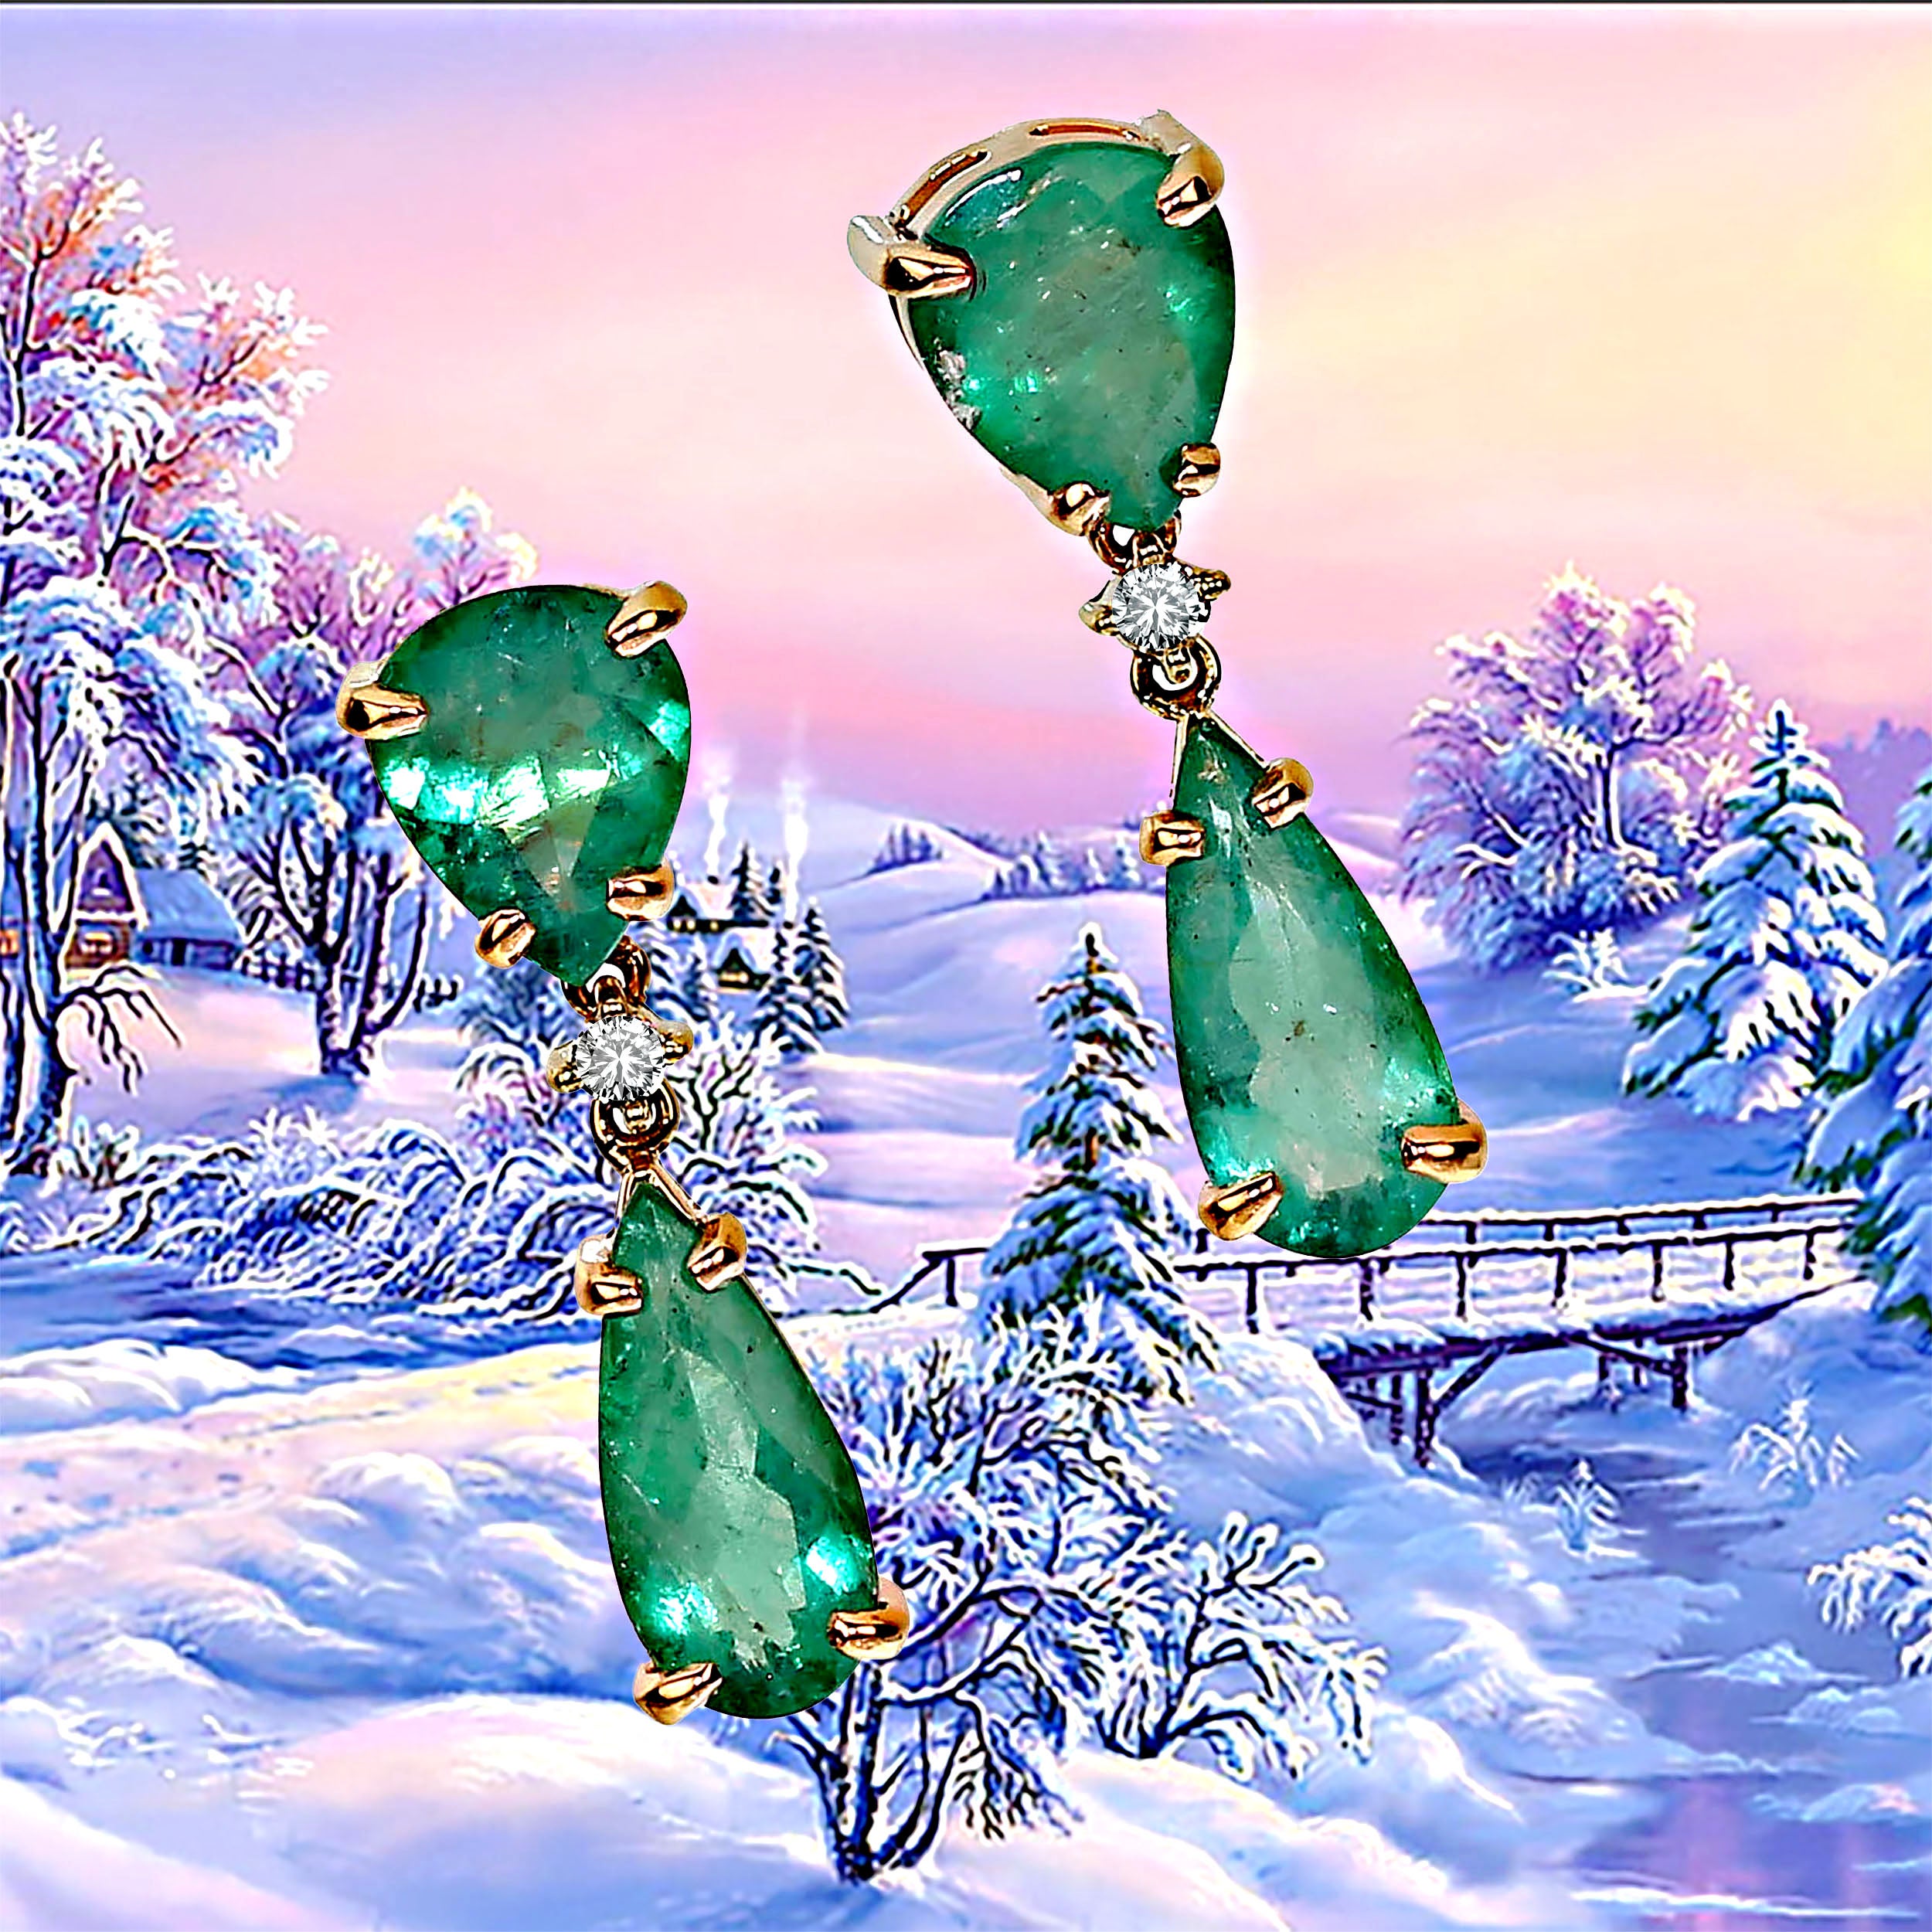 Sparkling handmade Brazilian emerald earrings.  These one of a kind earrings are created from hand selected  gemstones from our favorite vendor in Belo Horizonte, Minas Gerais, Brazil. These are gorgeous medium color and quality emeralds from Bahia,